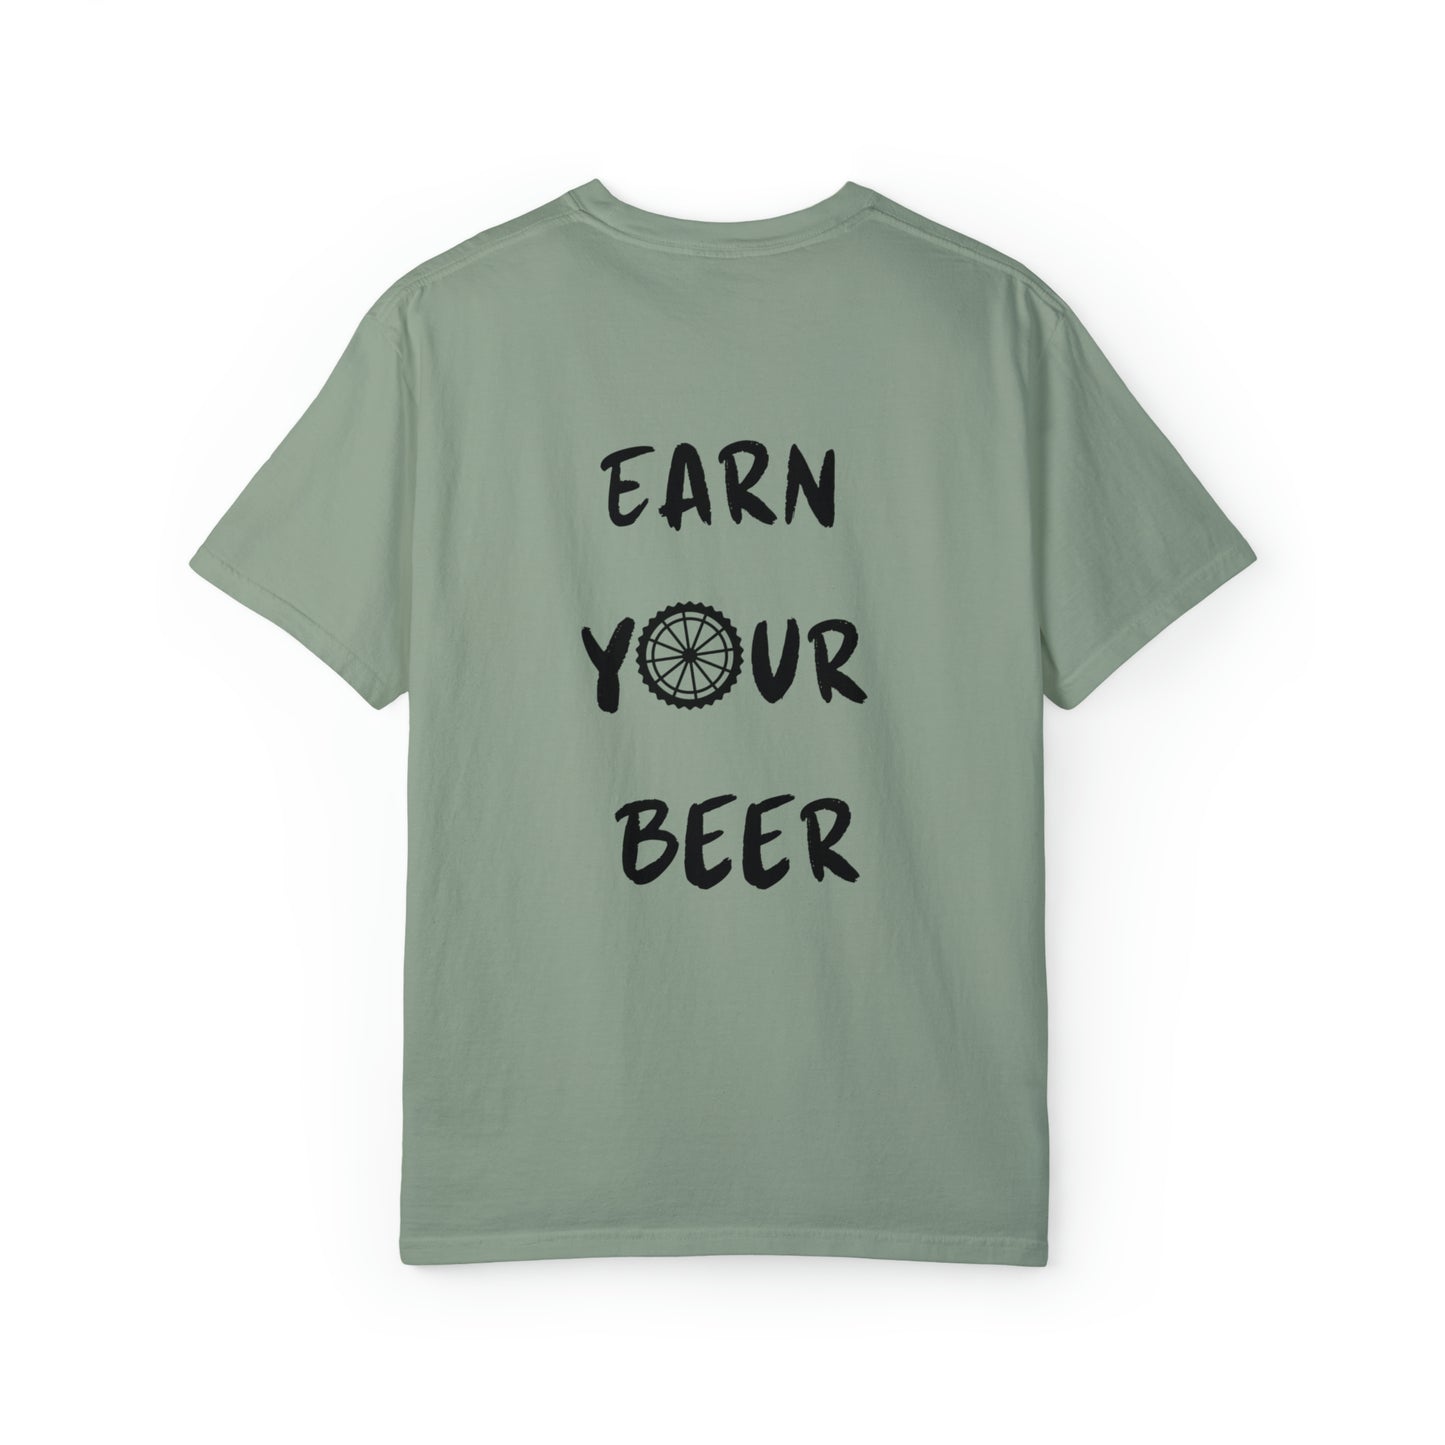 Earn Your Beer T-shirt